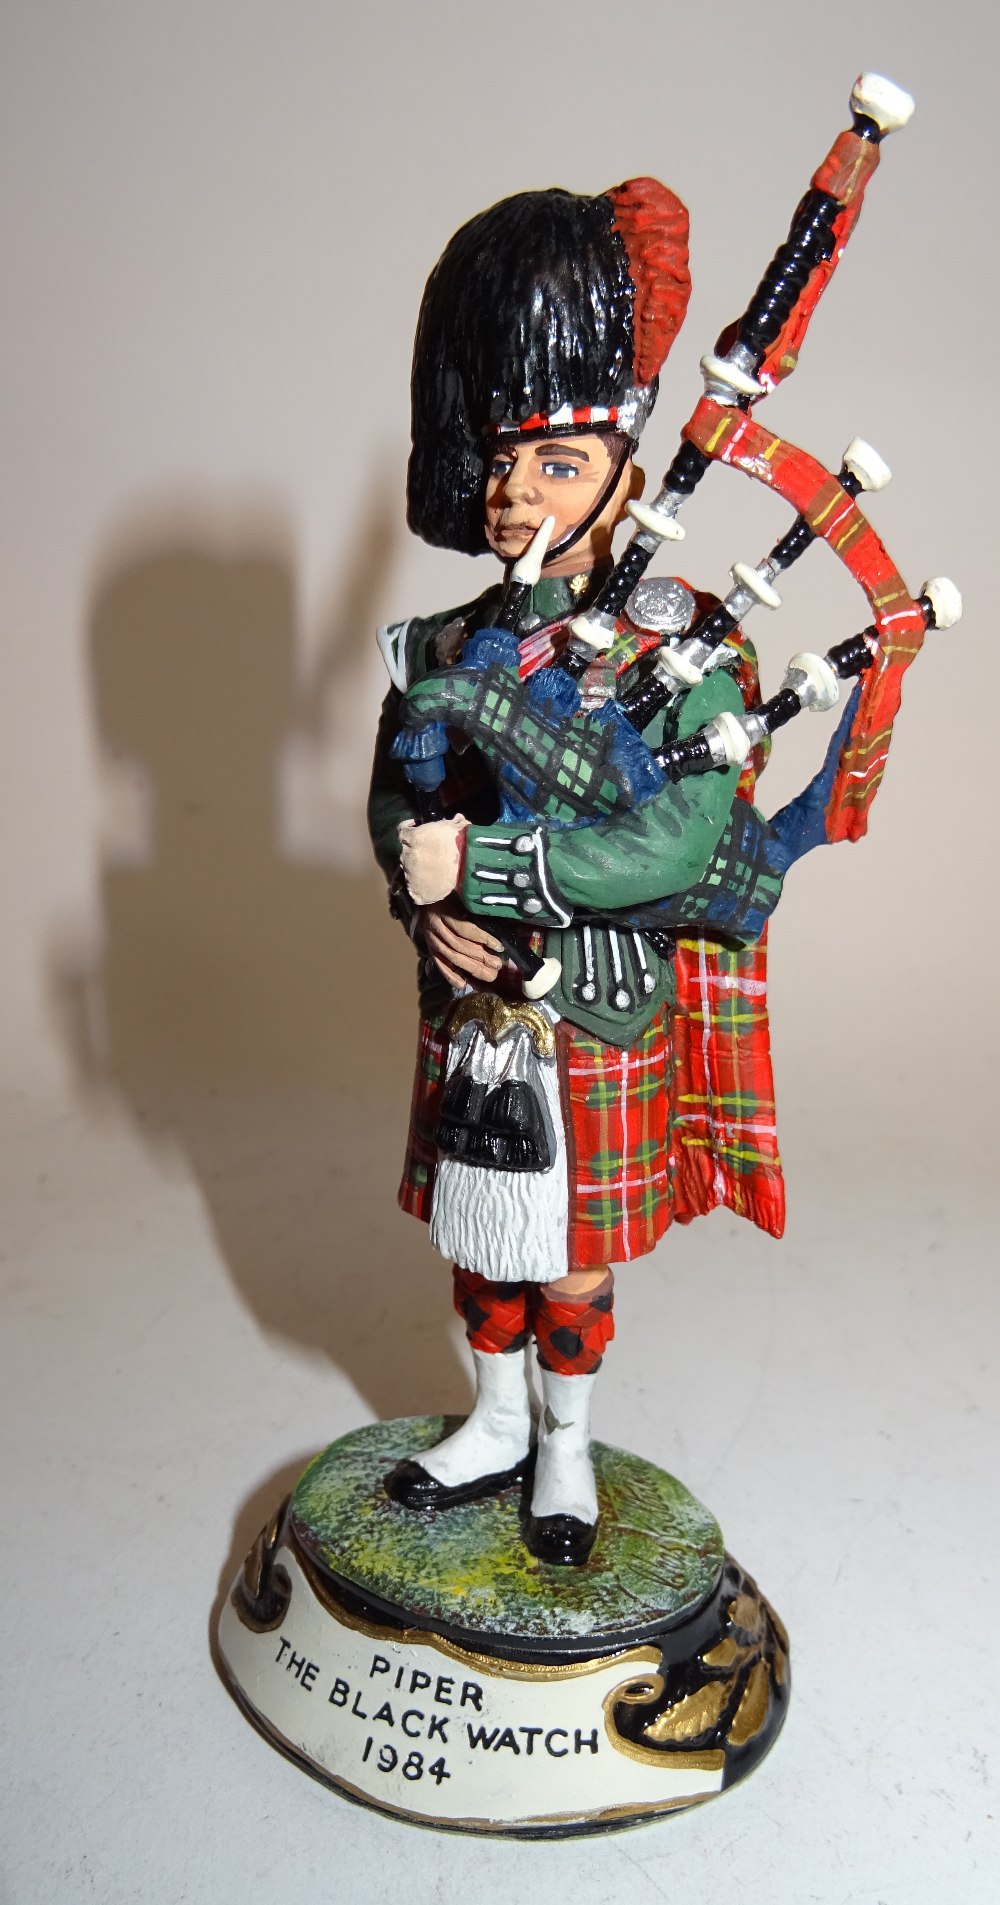 Figurines depicting the Black Watch - Image 3 of 4